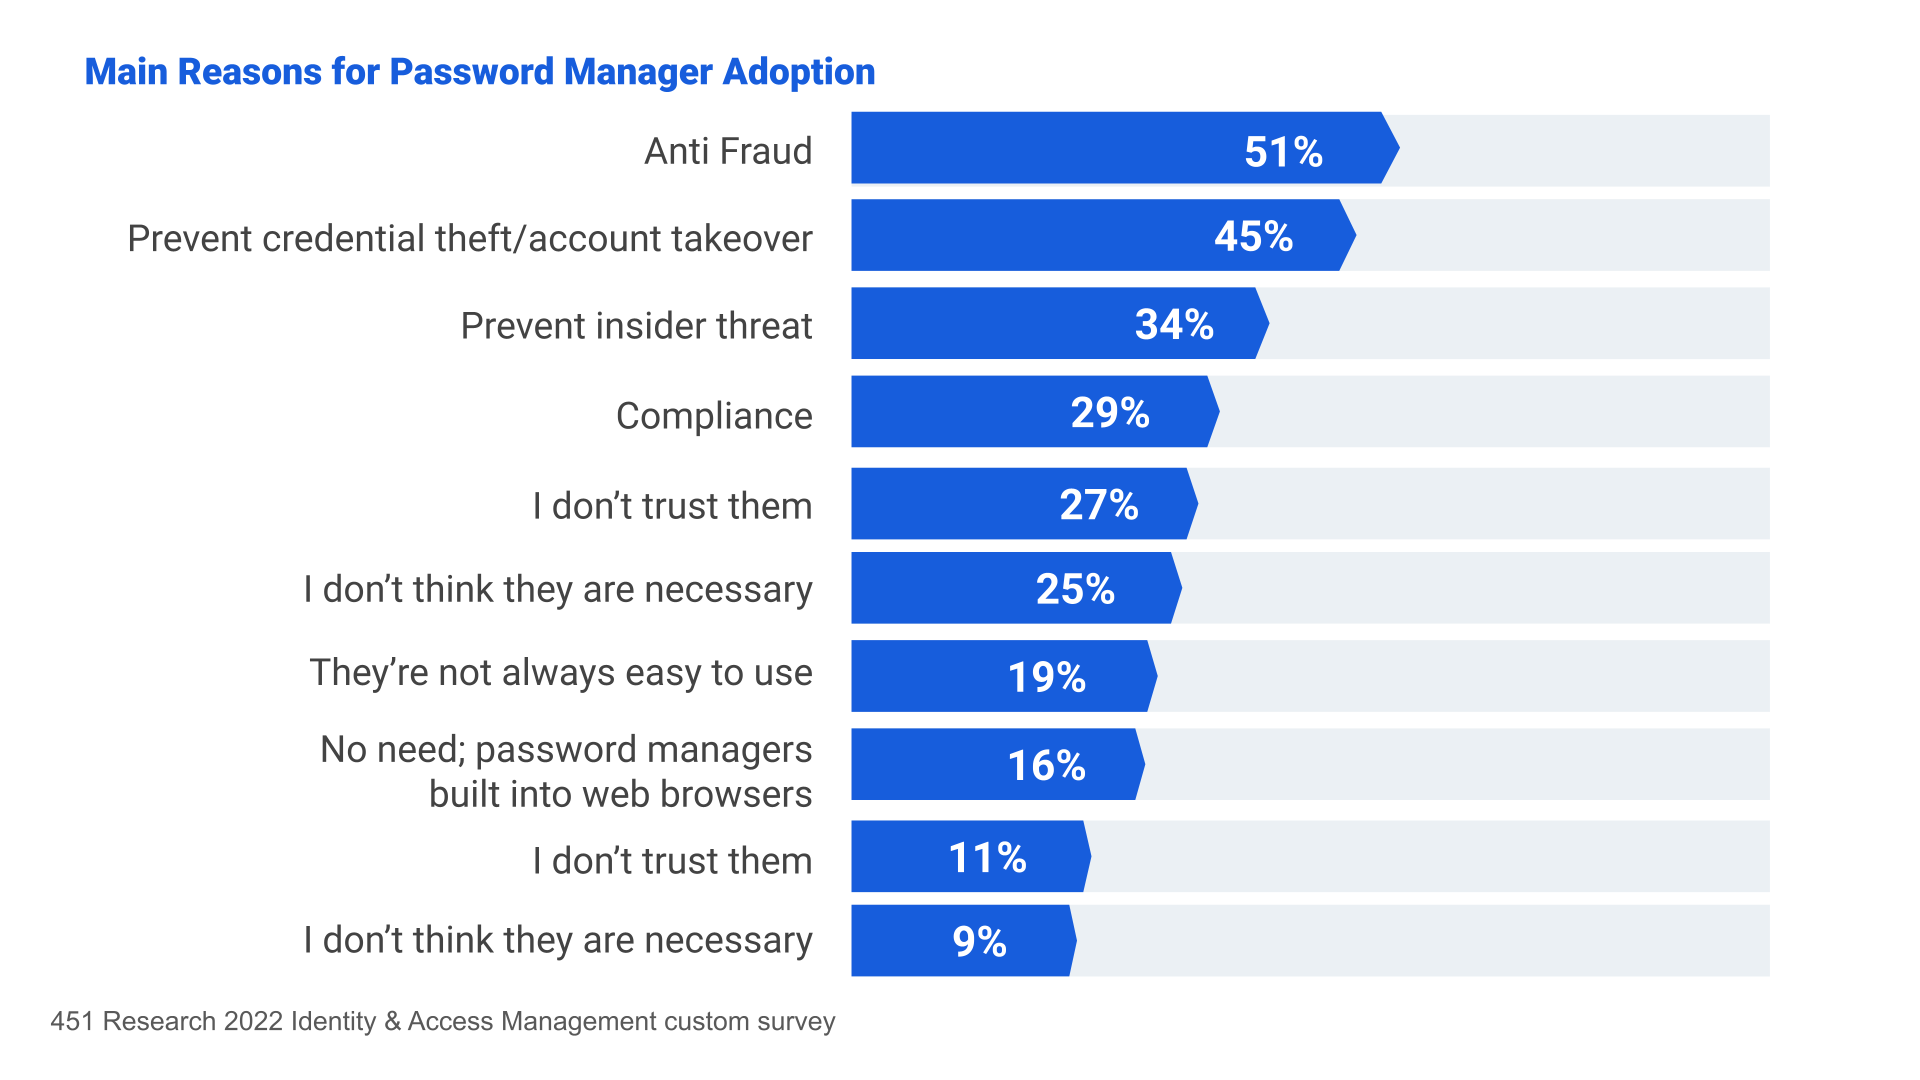 Figure 1: Main Reasons for Password Manager Adoption